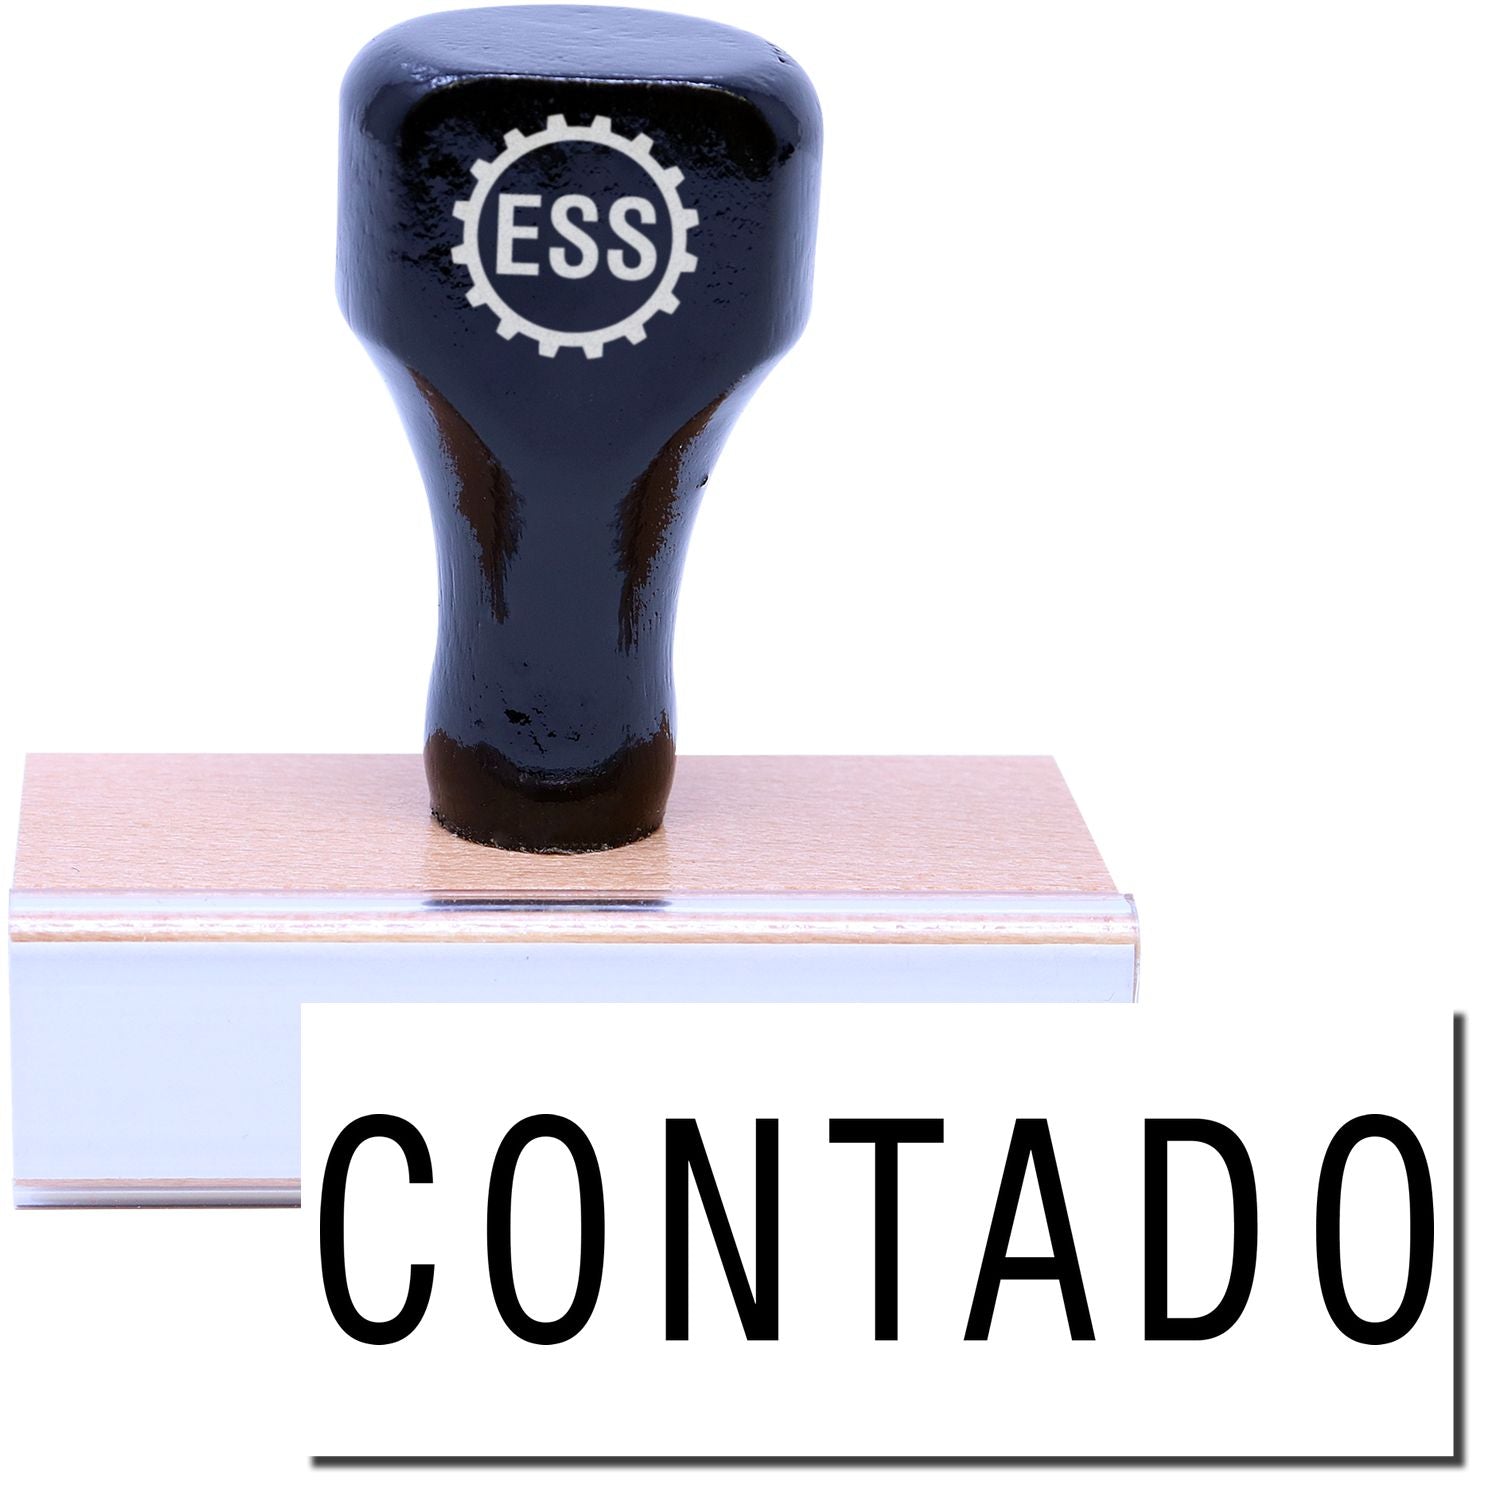 A stock office rubber stamp with a stamped image showing how the text "CONTADO" in a large font is displayed after stamping.